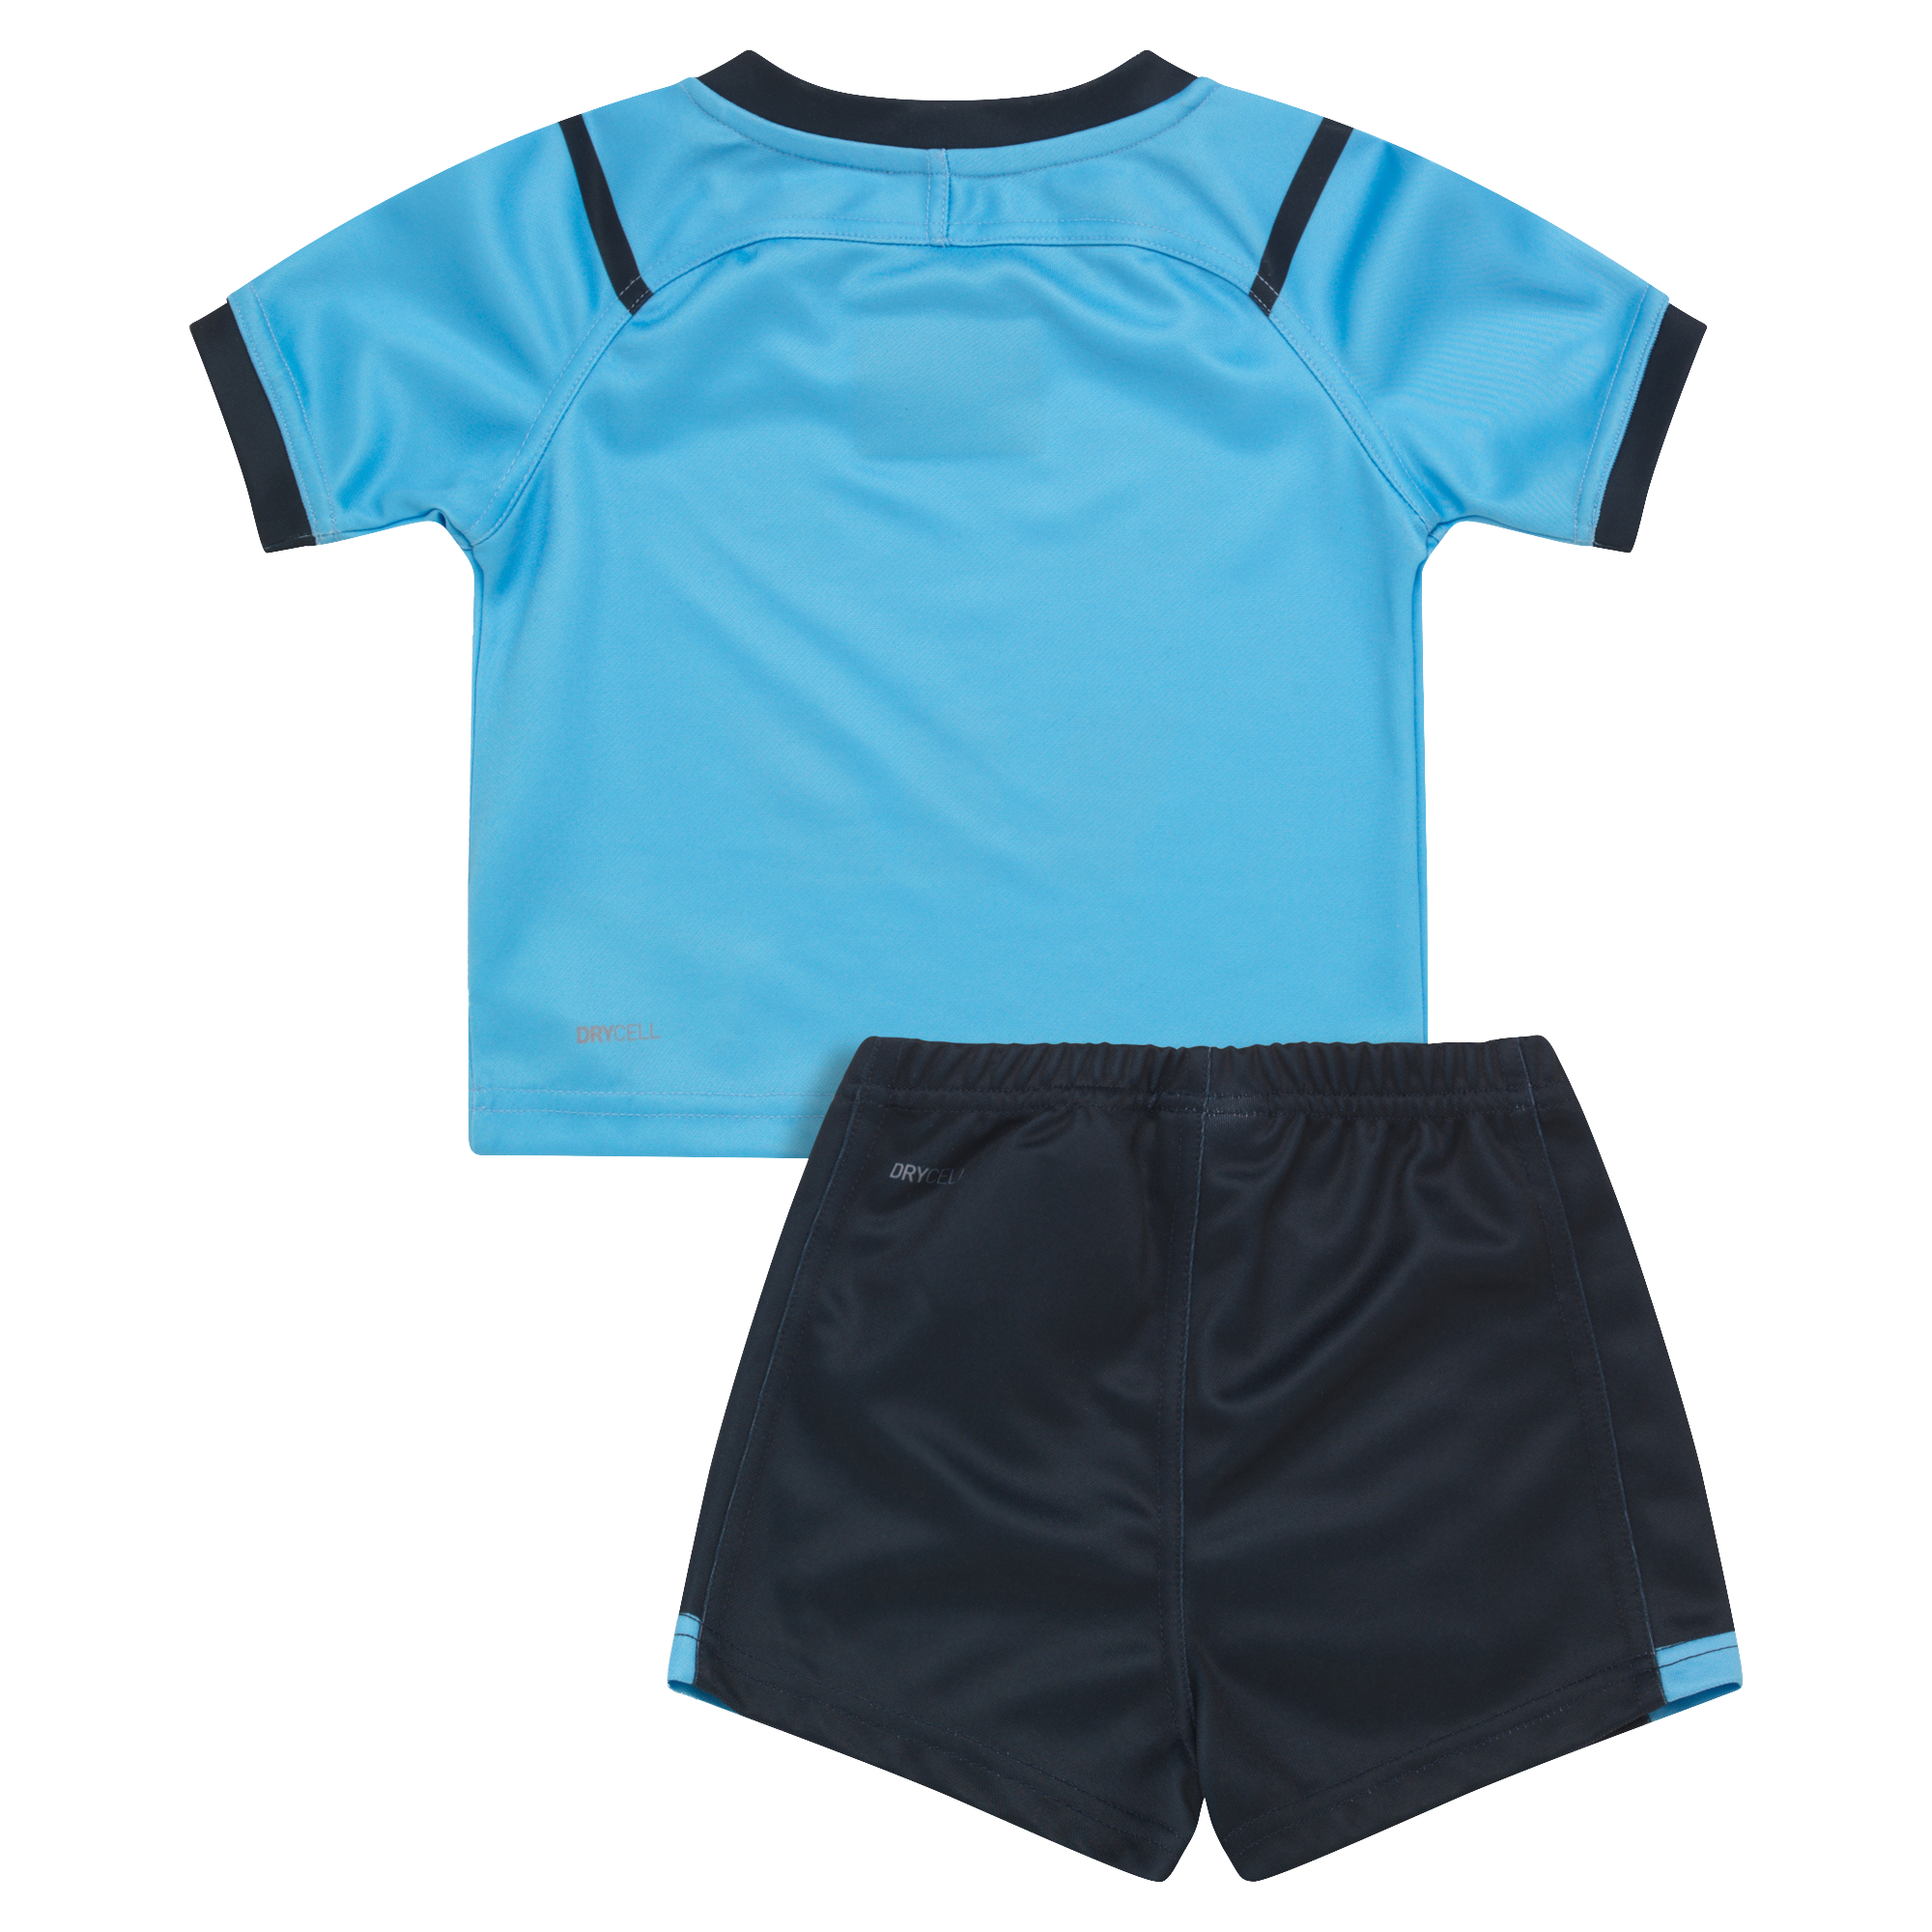 SOO NSW Home Jersey/Shorts set 2024 - infants